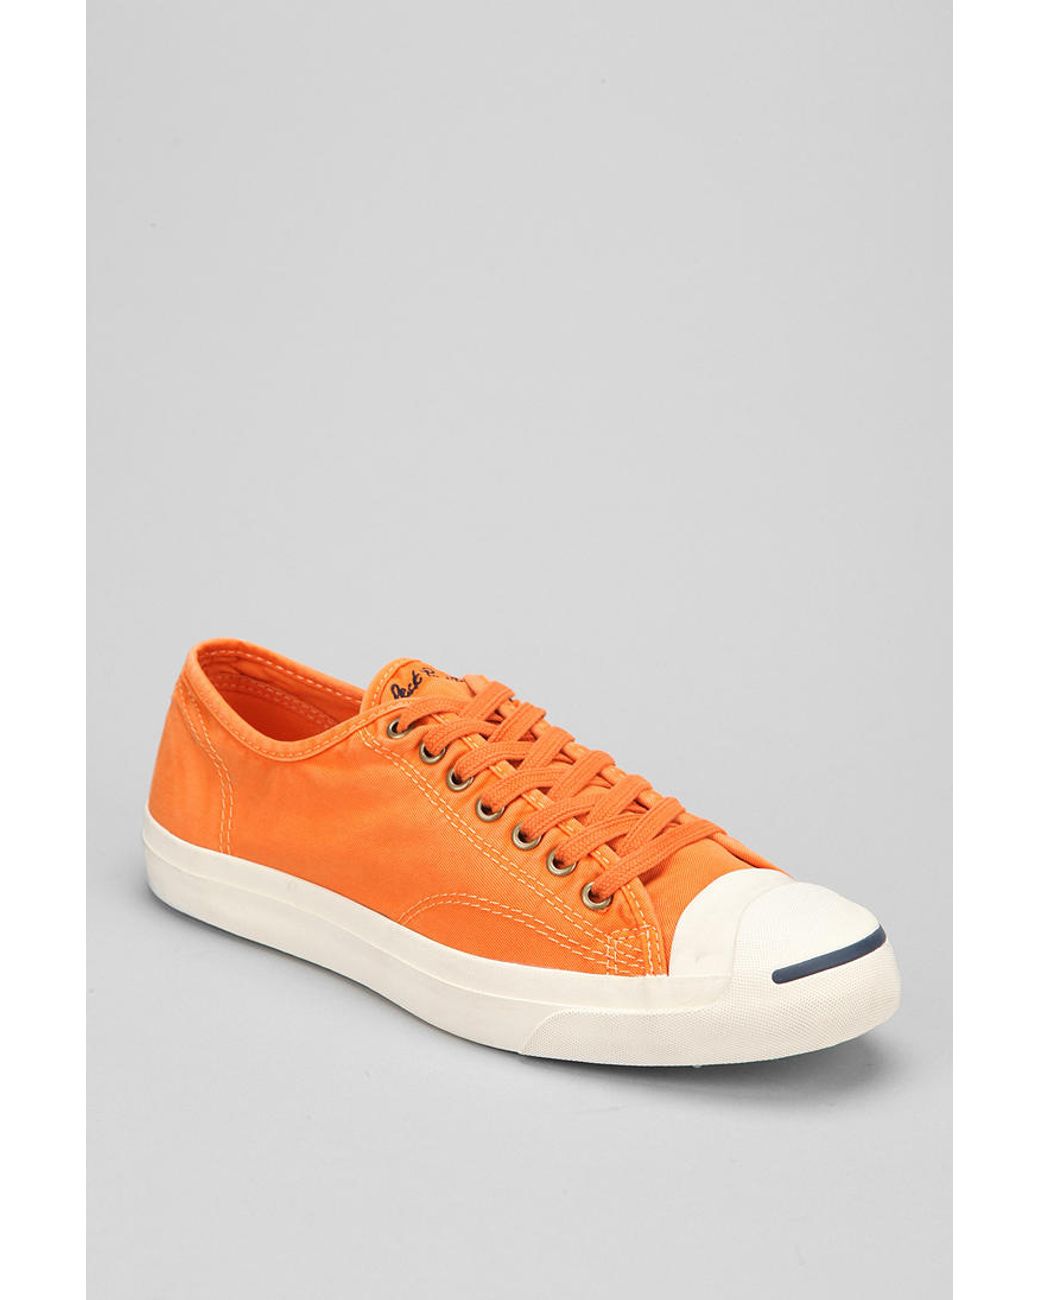 Converse Jack Purcell Washed Sneaker in Orange for Men | Lyst